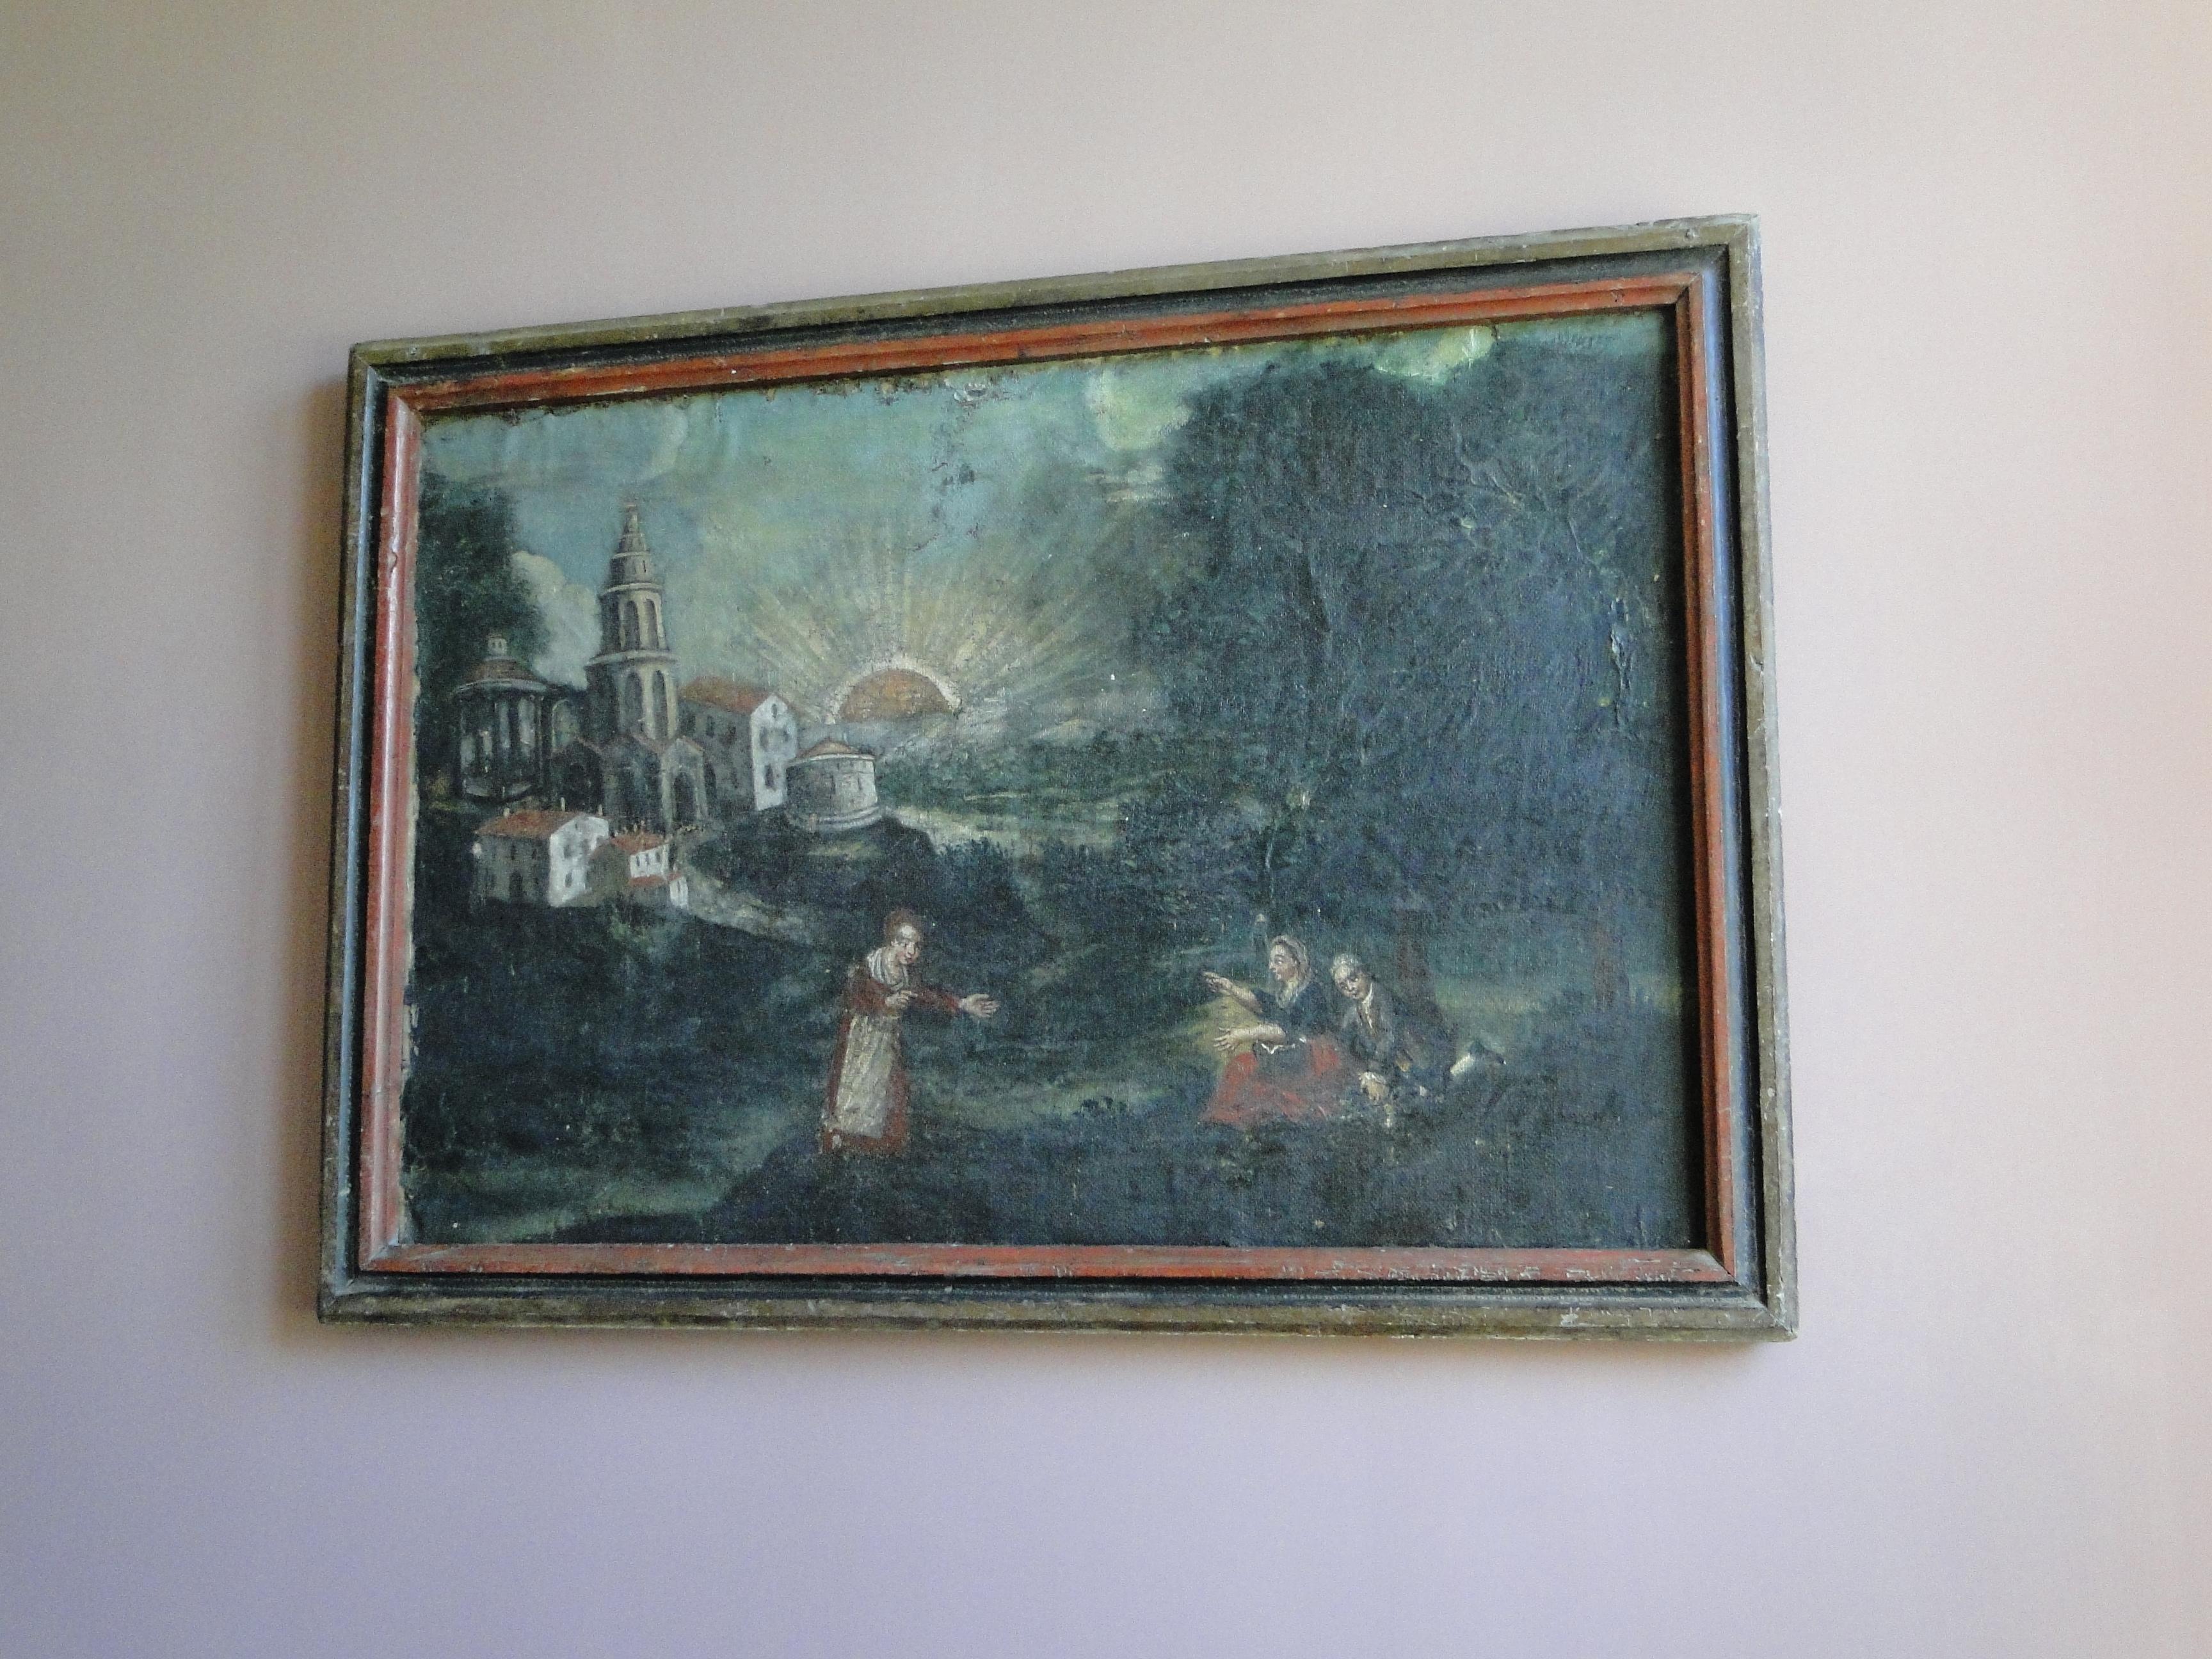 18th century Italian painting oil on canvas. Recanvassed. Restorations are visible. Wooden painted frame.